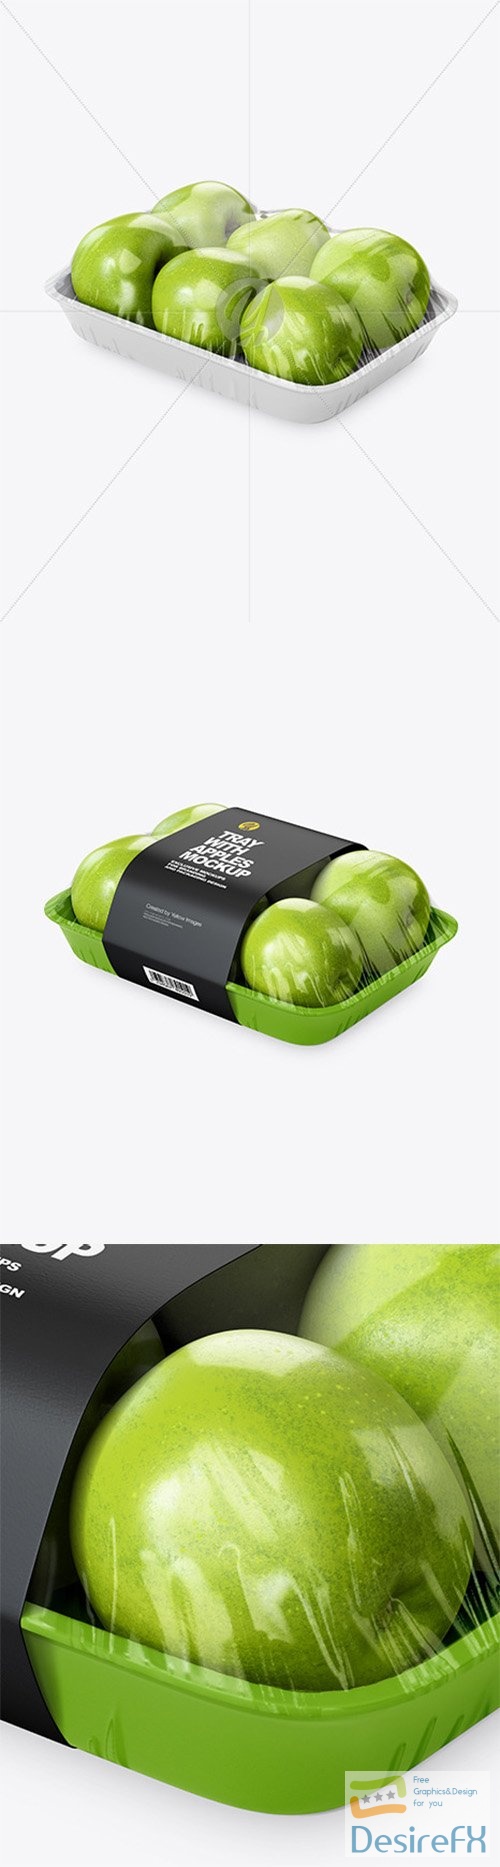 Tray with Green Apples Mockup 84581 TIF